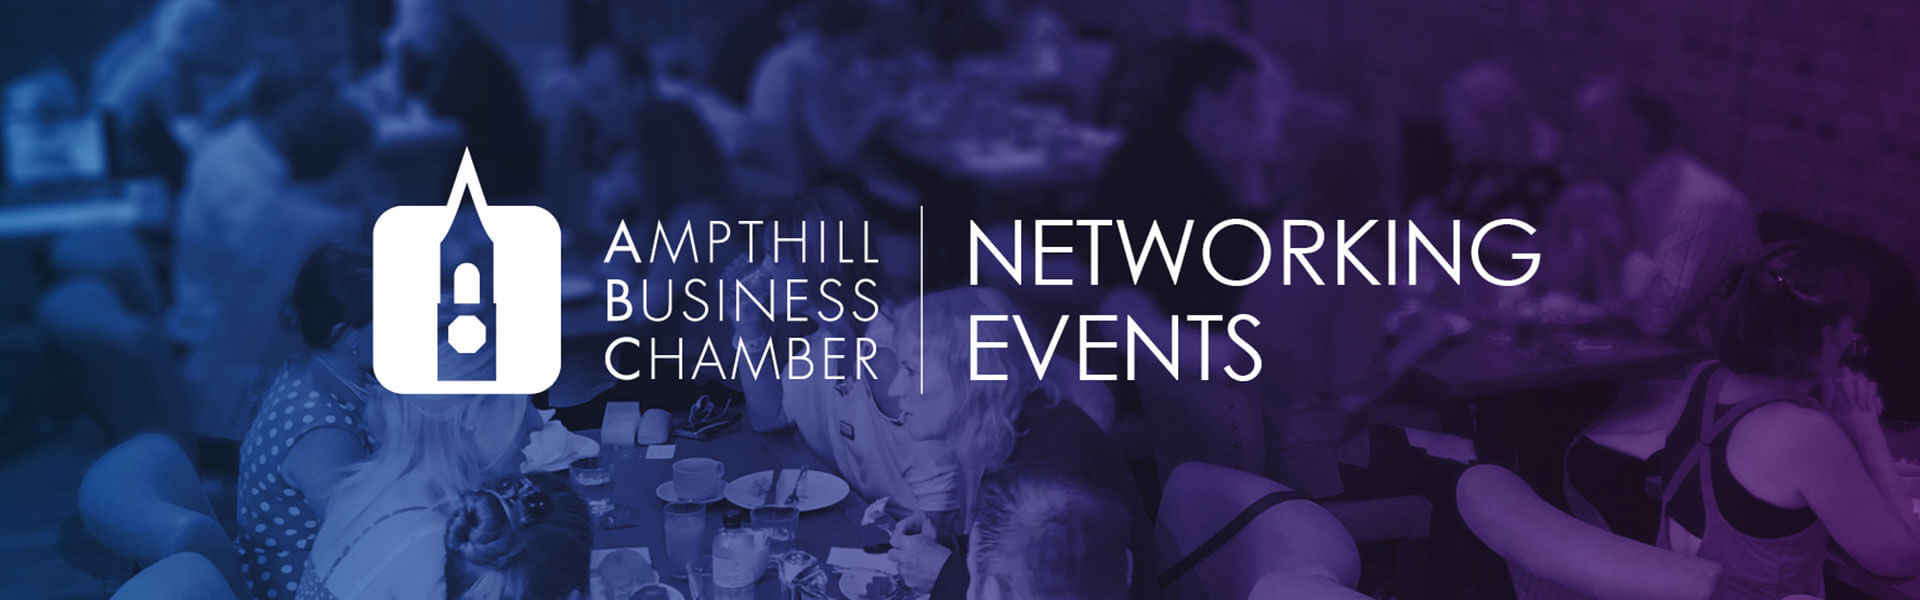 Ampthill Business Chamber Networking Event